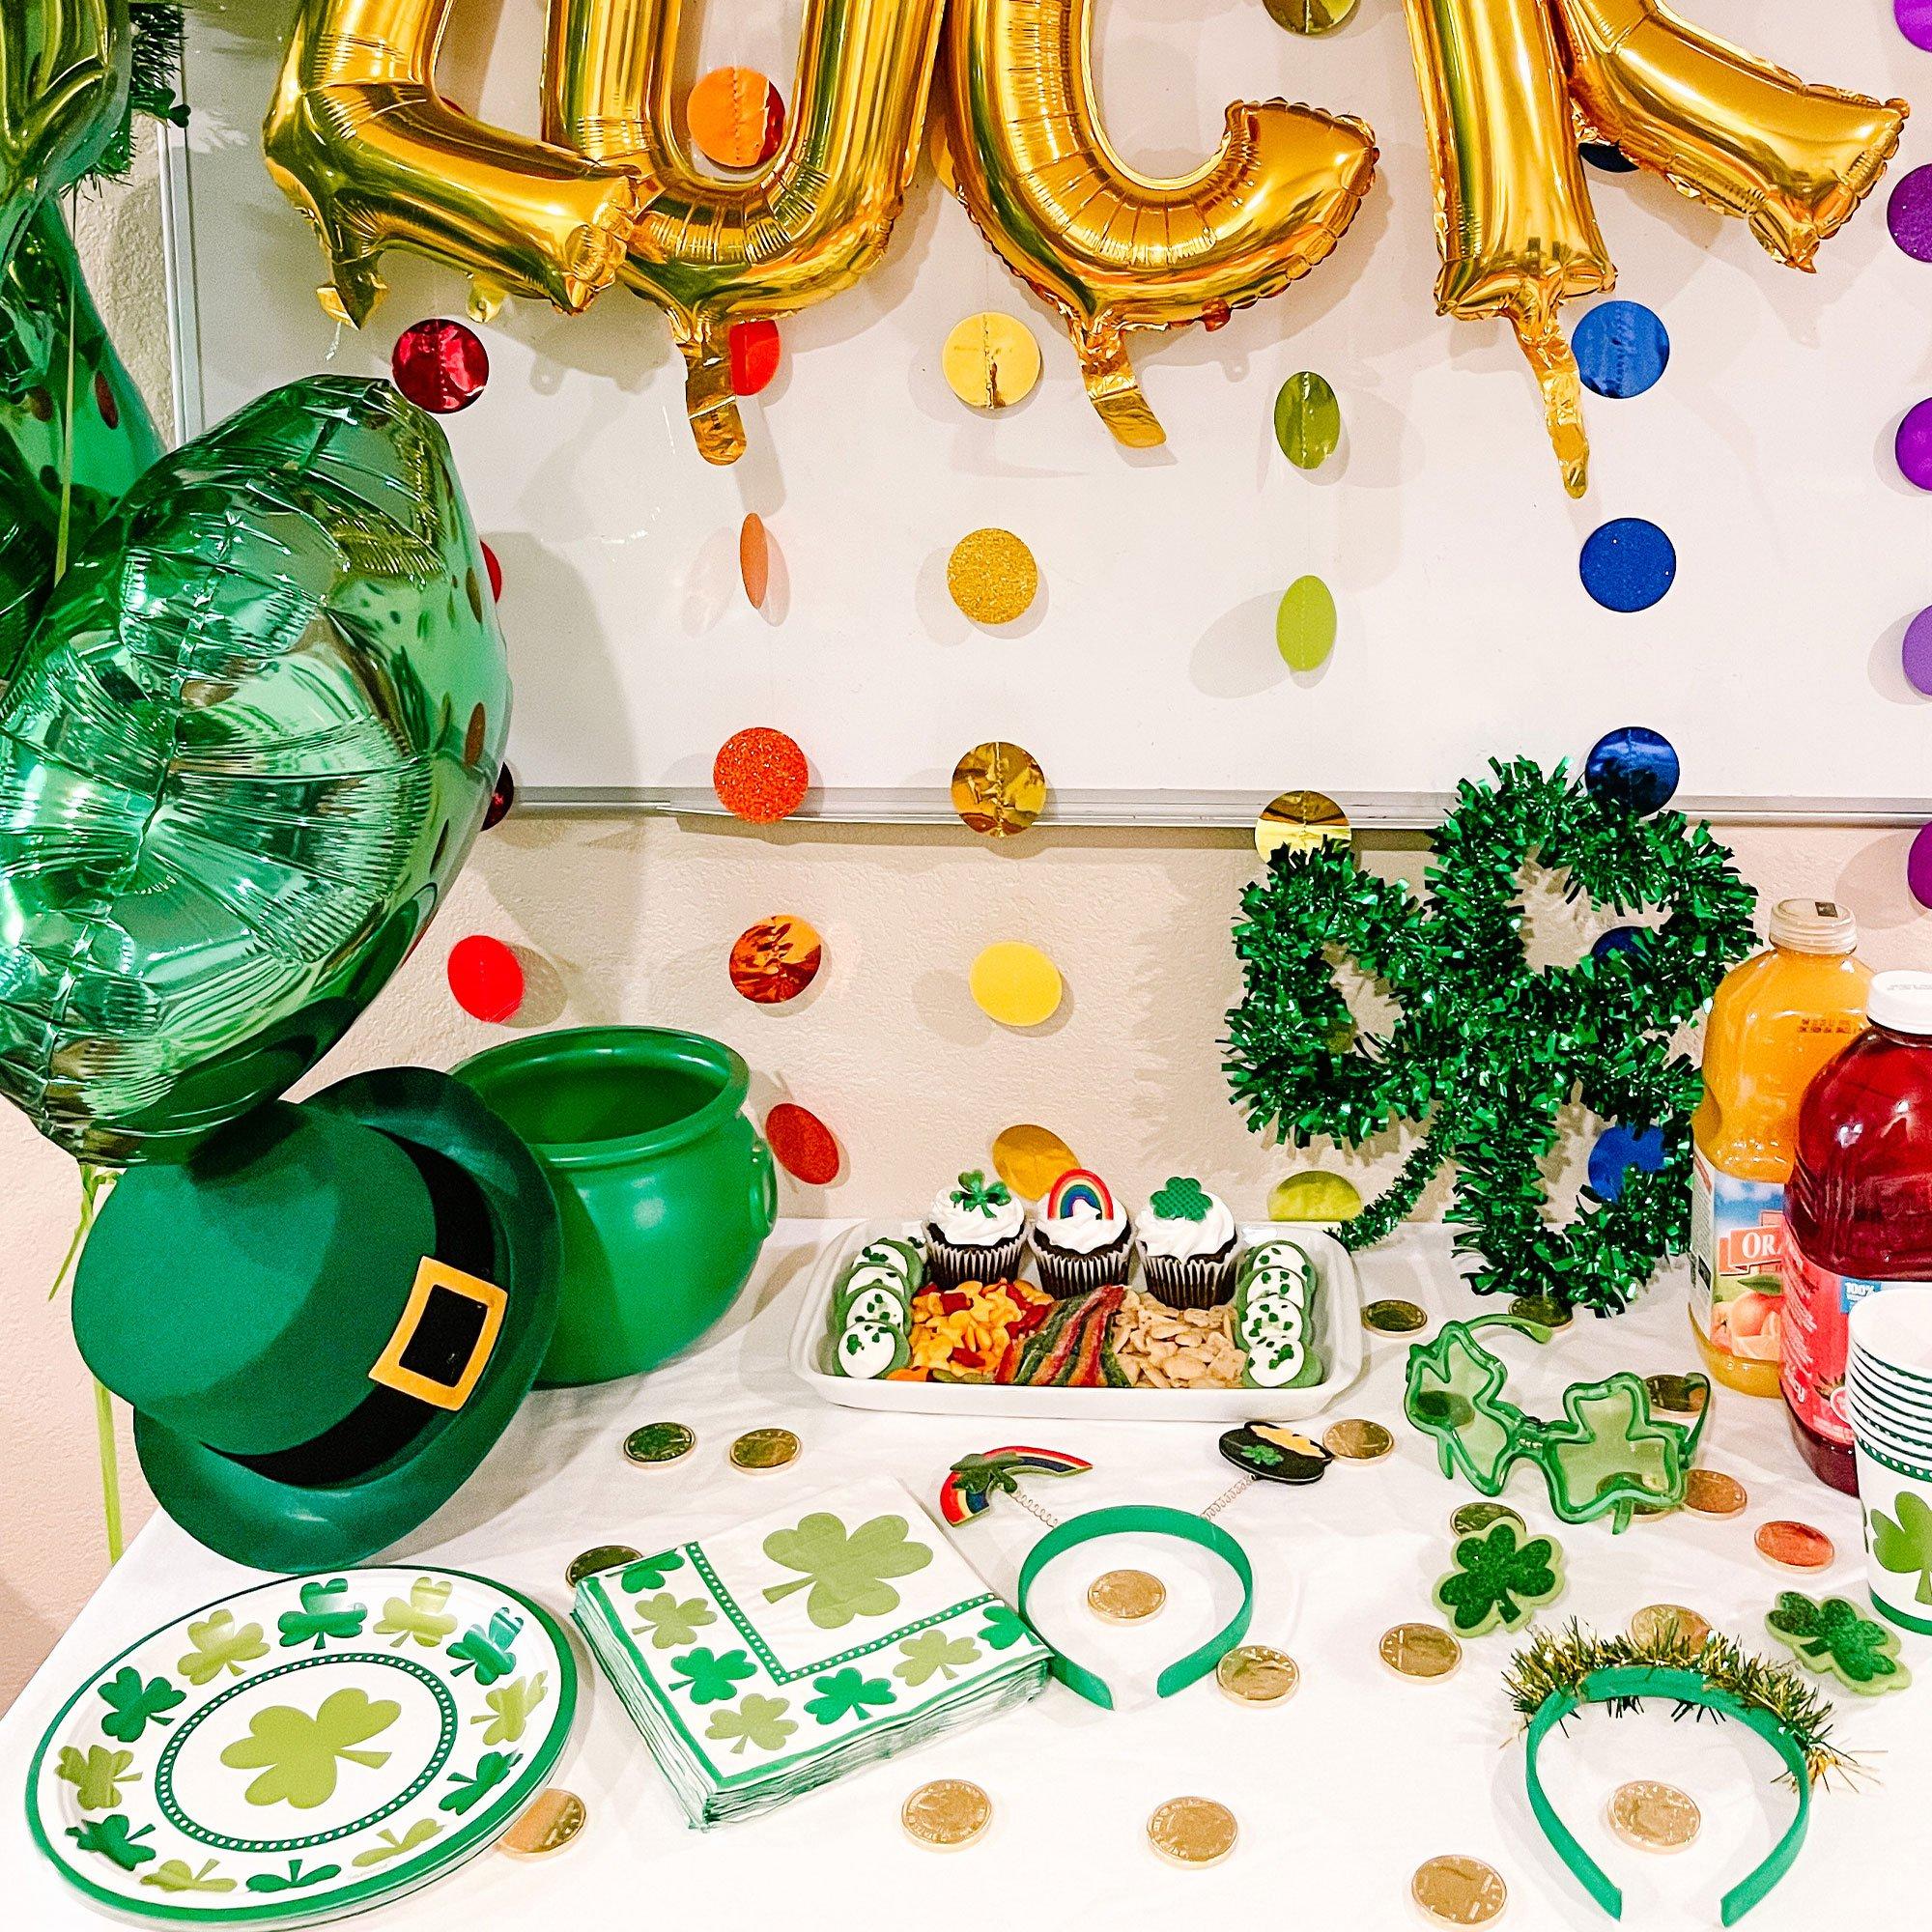 St. Patrick's Day Top Hat